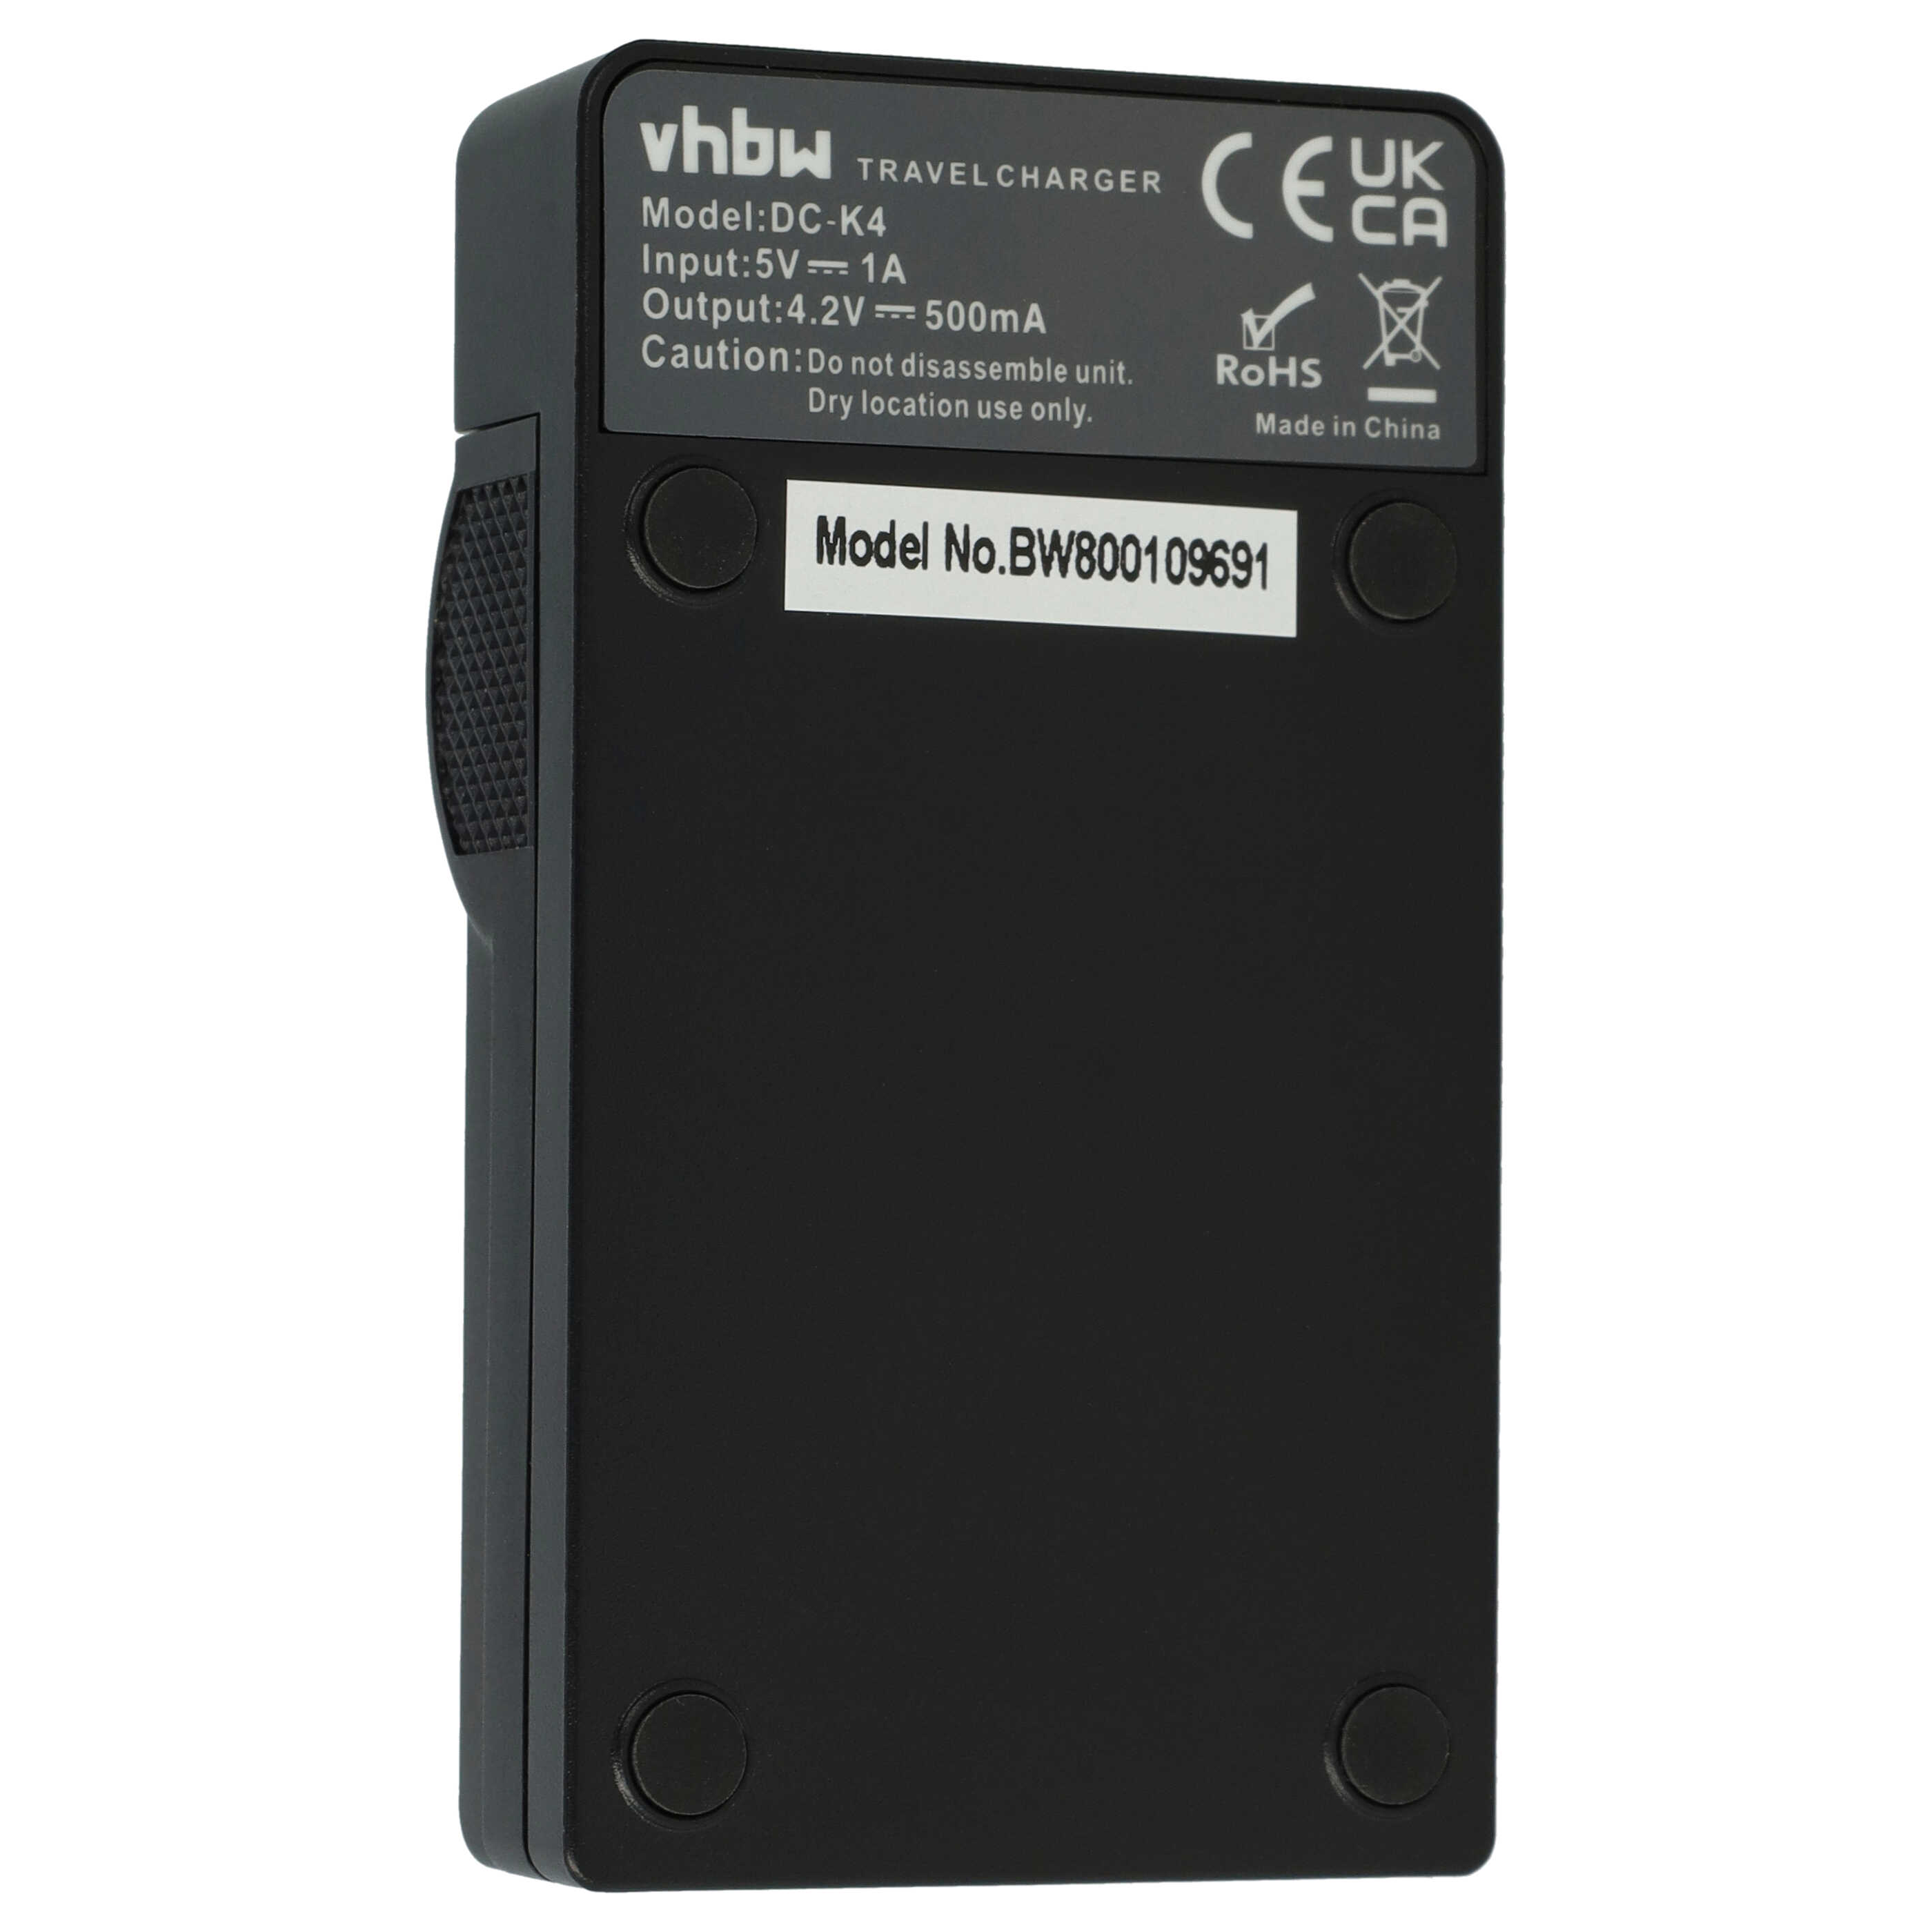 Battery Charger suitable for V-Lux 20 Camera etc. - 0.5 A, 4.2 V